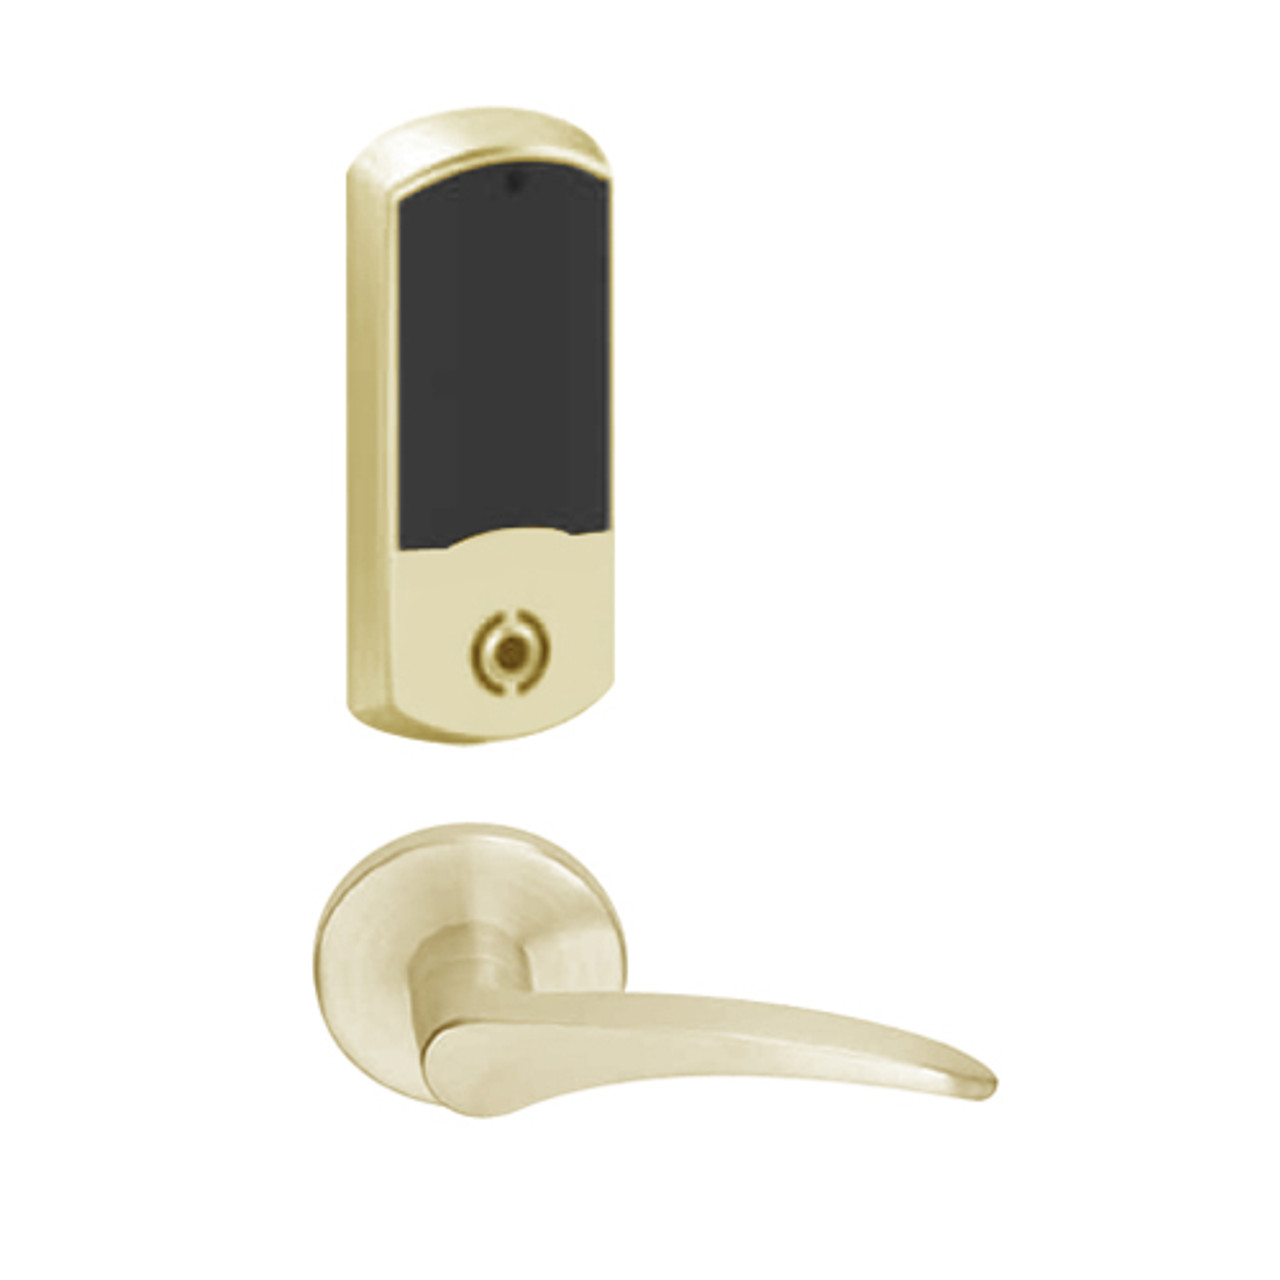 LEMS-GRW-BD-12-606-00A-RH Schlage Storeroom Wireless Greenwich Mortise Lock with LED Indicator and 12 Lever Prepped for SFIC in Satin Brass